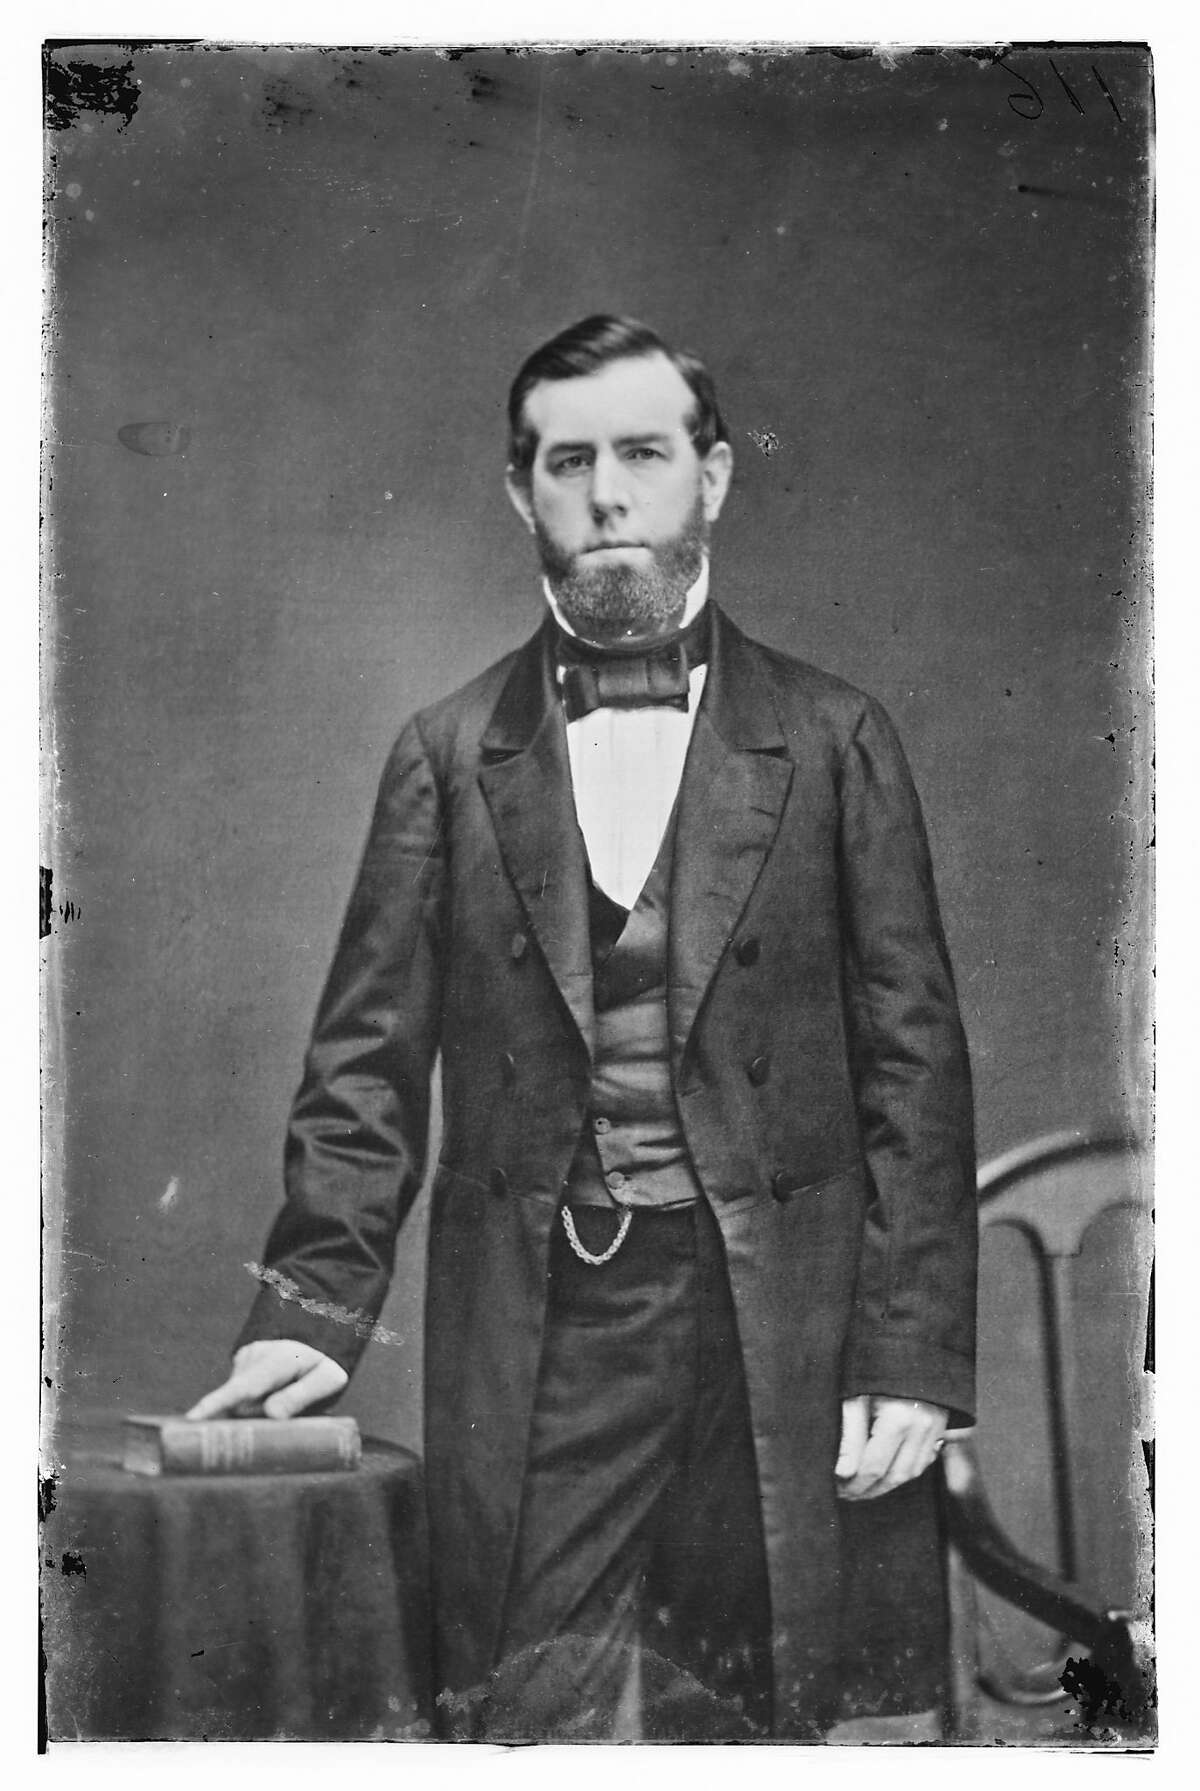 FILE - In this undated black-and-white handout file photo provided by the Library of Congress, Sen. David Broderick, D-Calif. is seen. Nearly two years before the first shots were fired in the Civil War, simmering hostilities over slavery erupted on a "field of honor" in California, where a pro-slavery judge mortally wounded an anti-slavery senator in a duel. (AP Photo/Library of Congress)